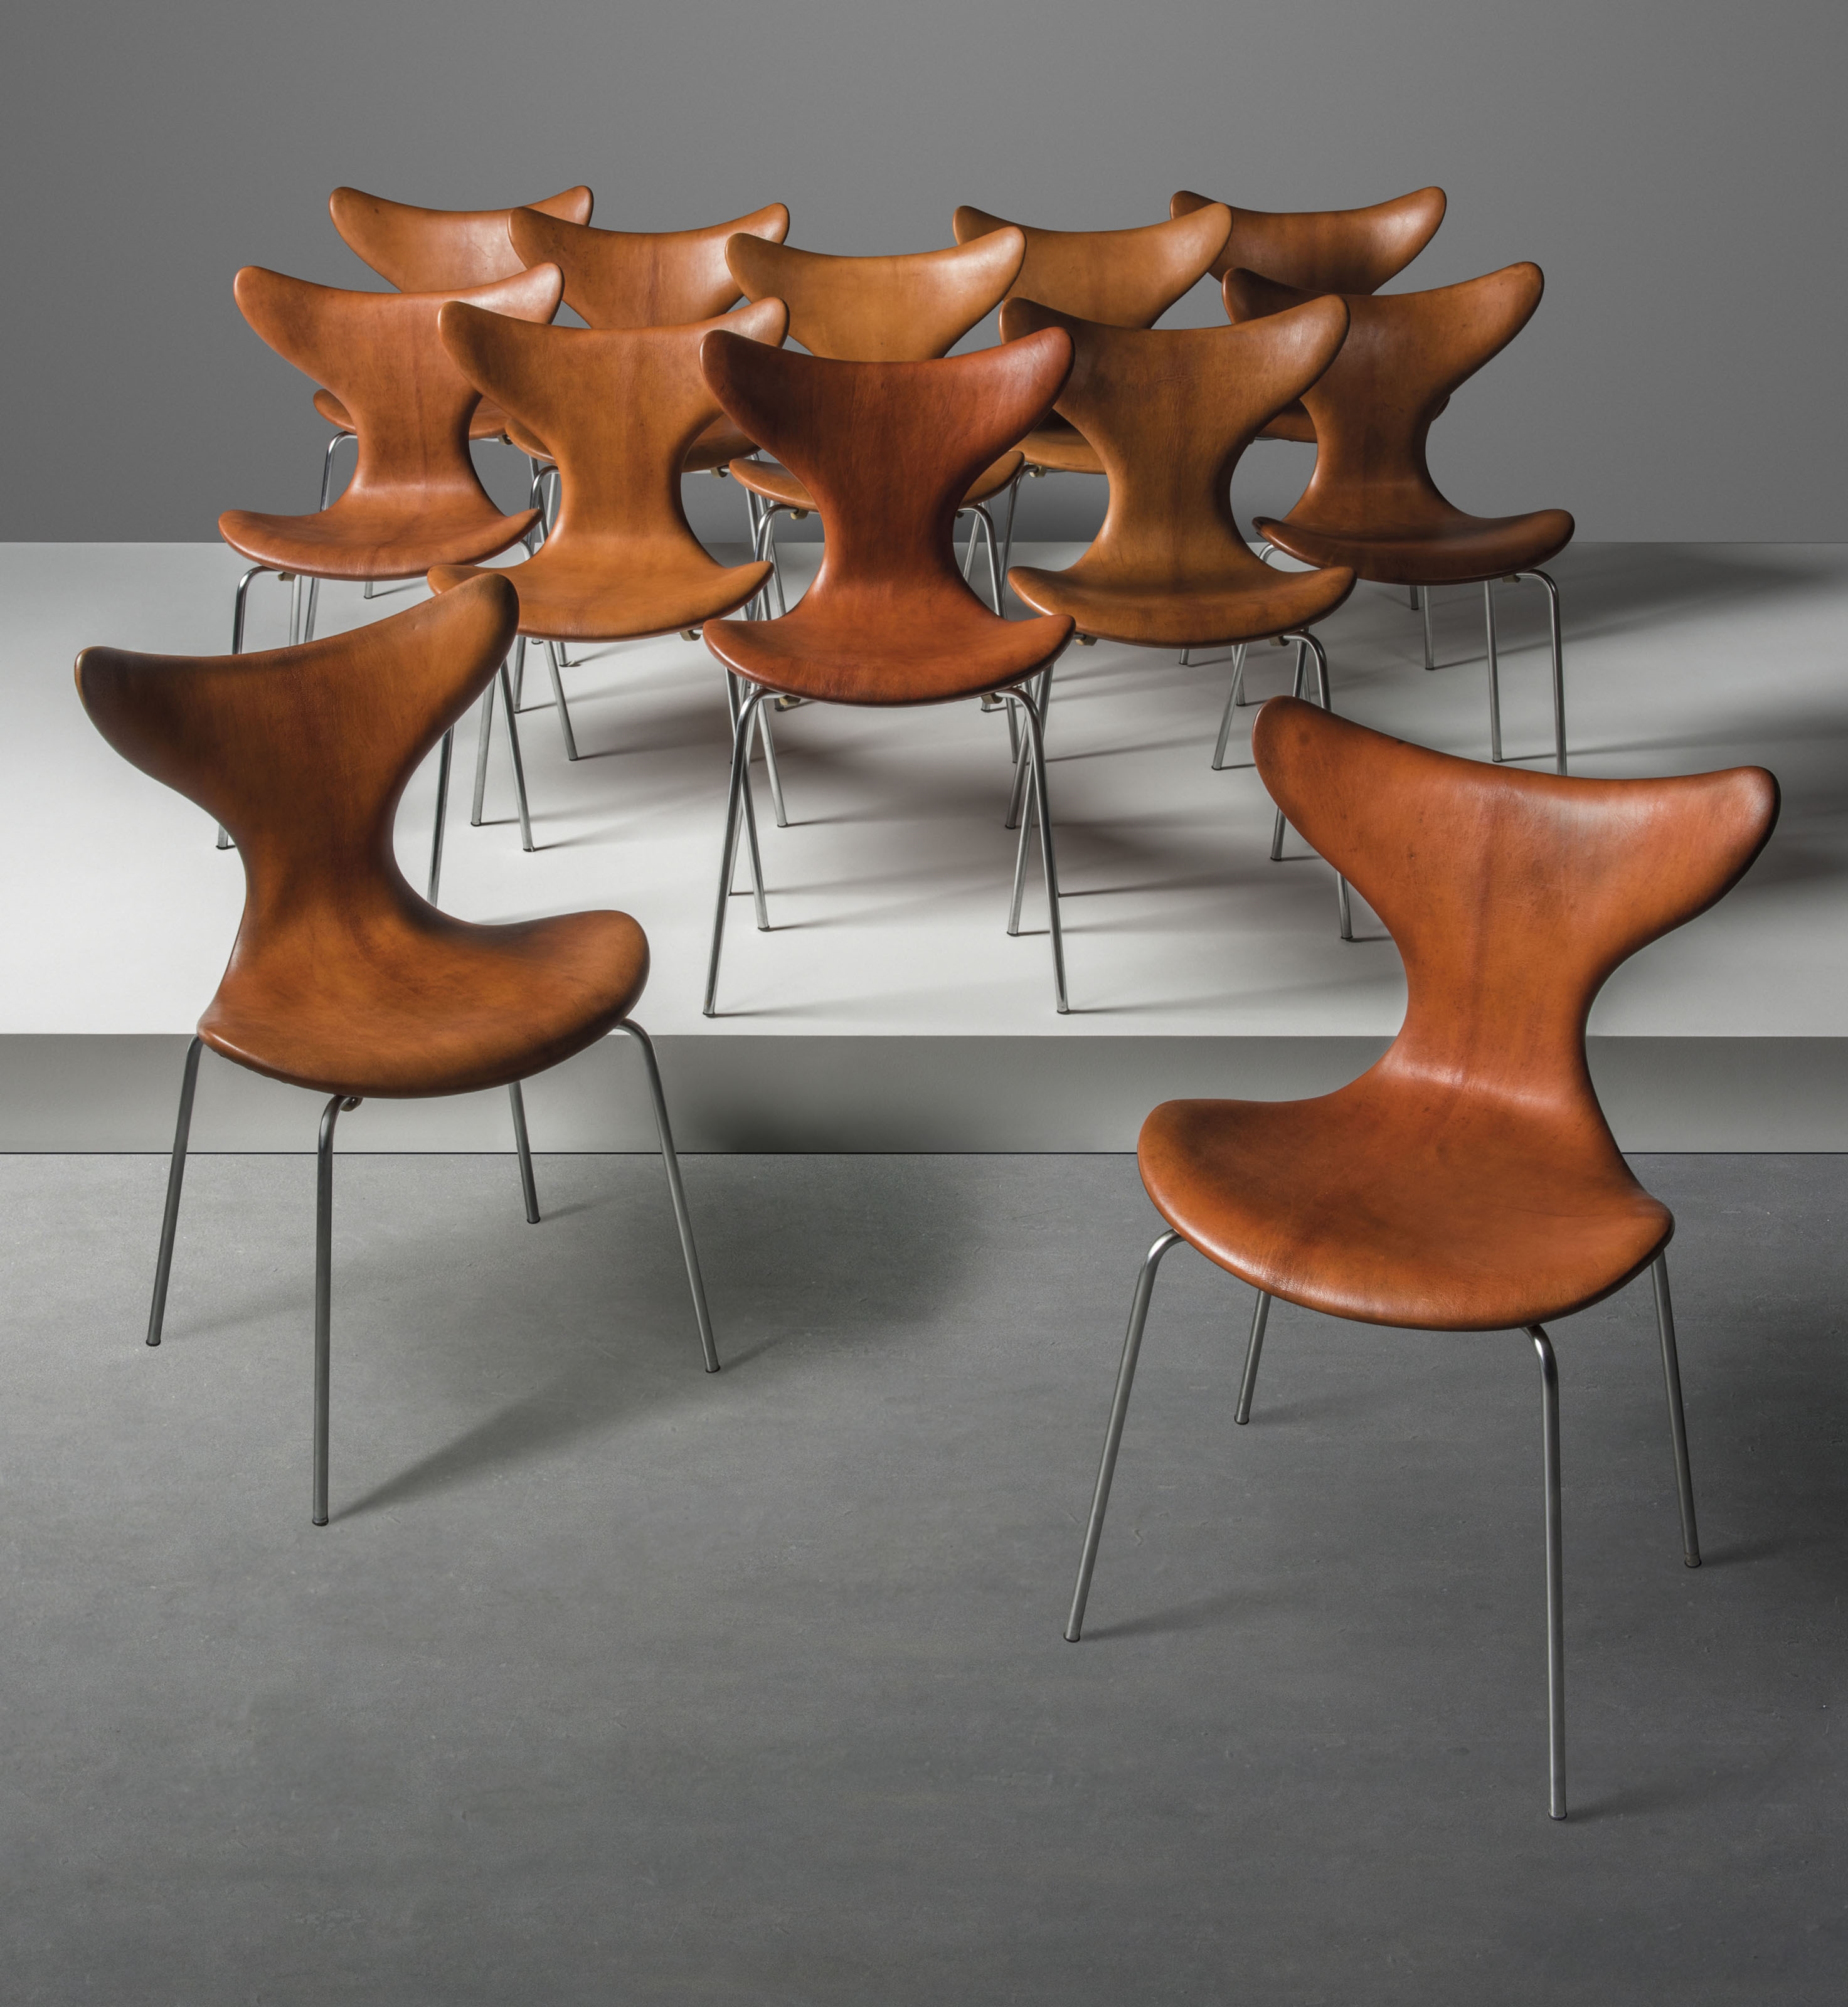 A SET OF TWELVE CHAIRS, MODEL NO. 3208, DESIGNED 1969, EXECUTED 1971 by Arne Jacobsen, 1971